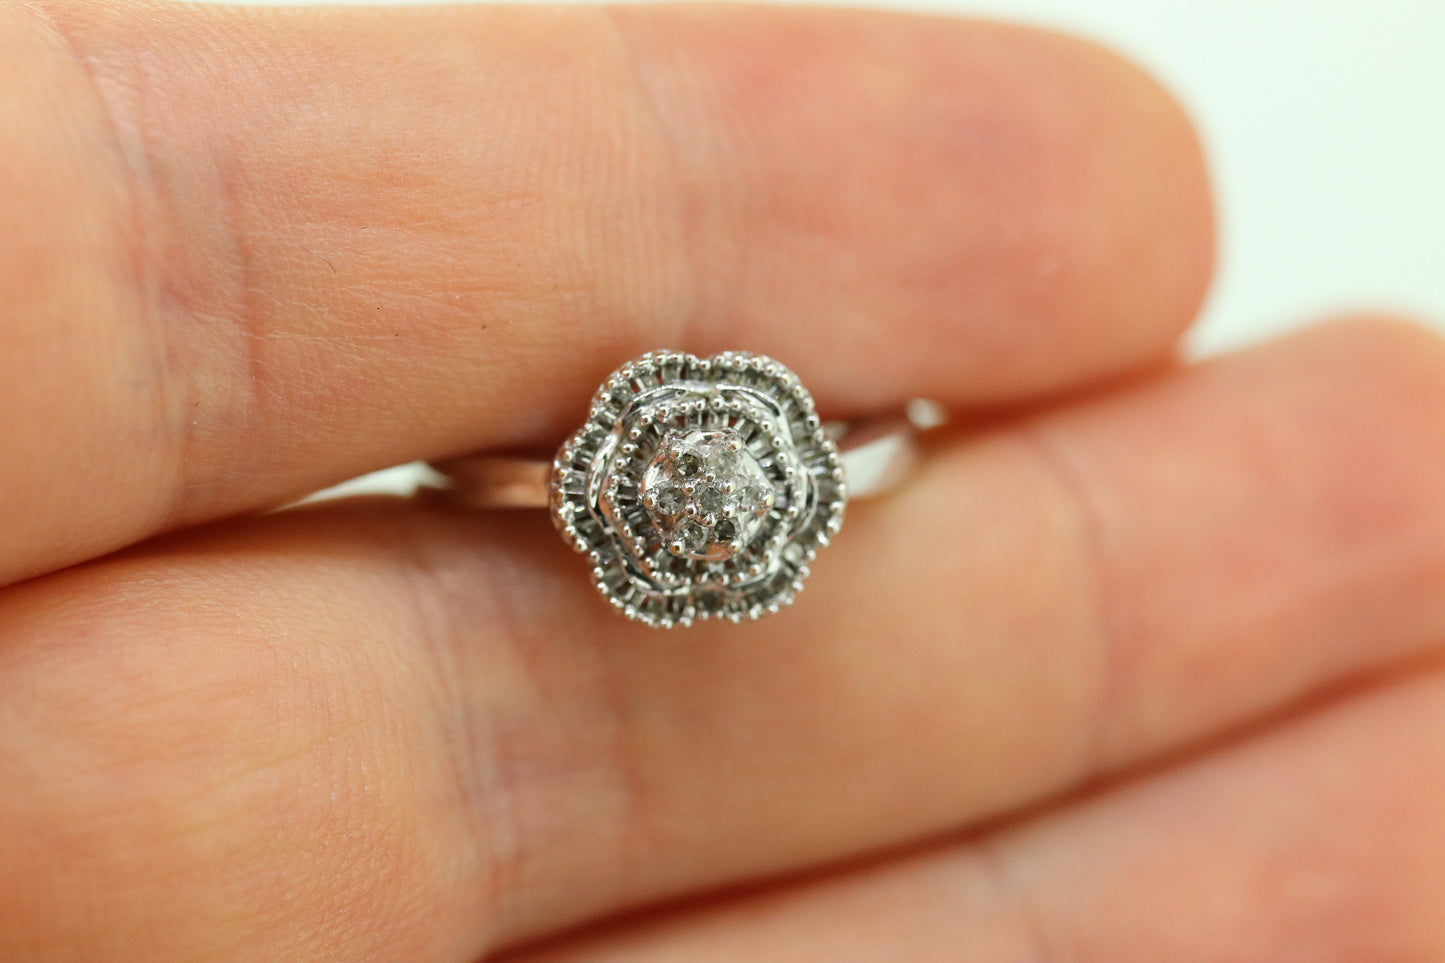 Diamond Daisy Cluster Elevated Ring. 10k White gold with round baguette diamond flower arrangement. st(52/90)